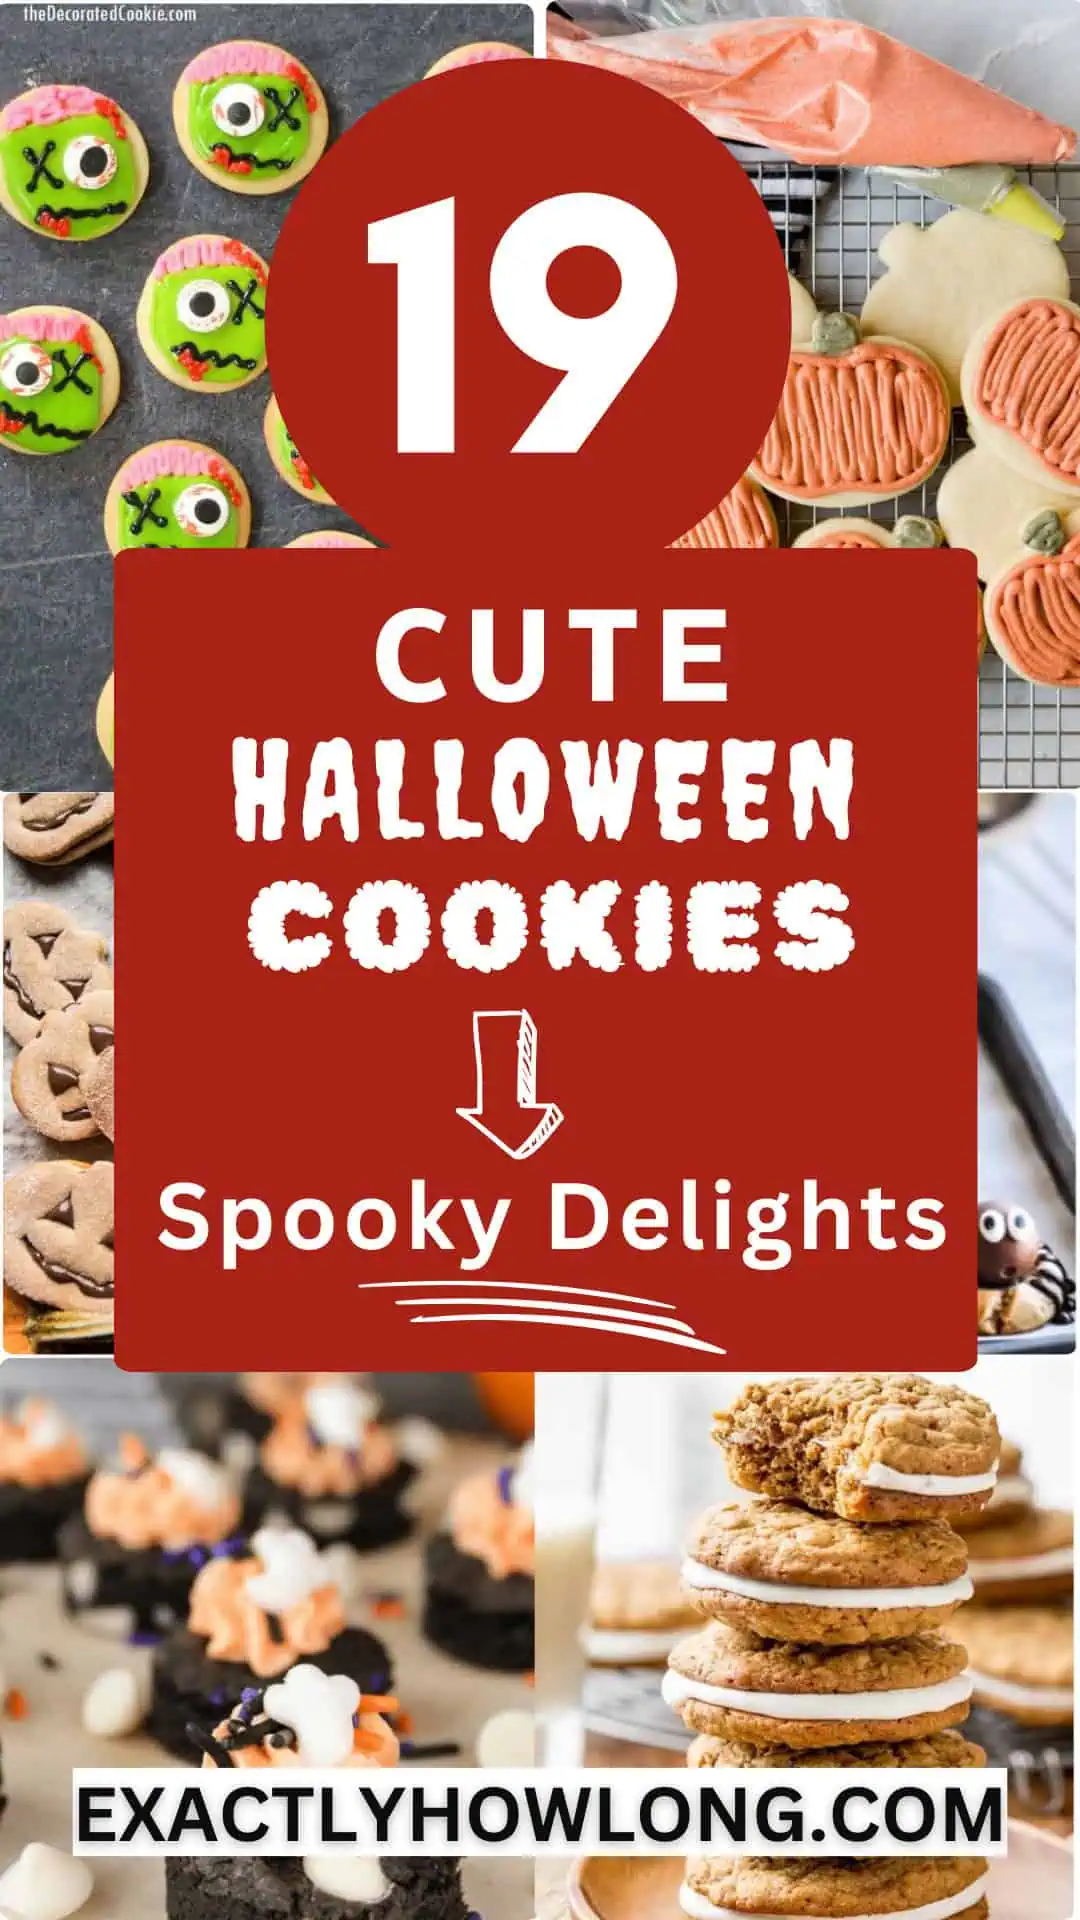 Adorable Halloween cookies with charming decorations, perfect for children's enjoyment